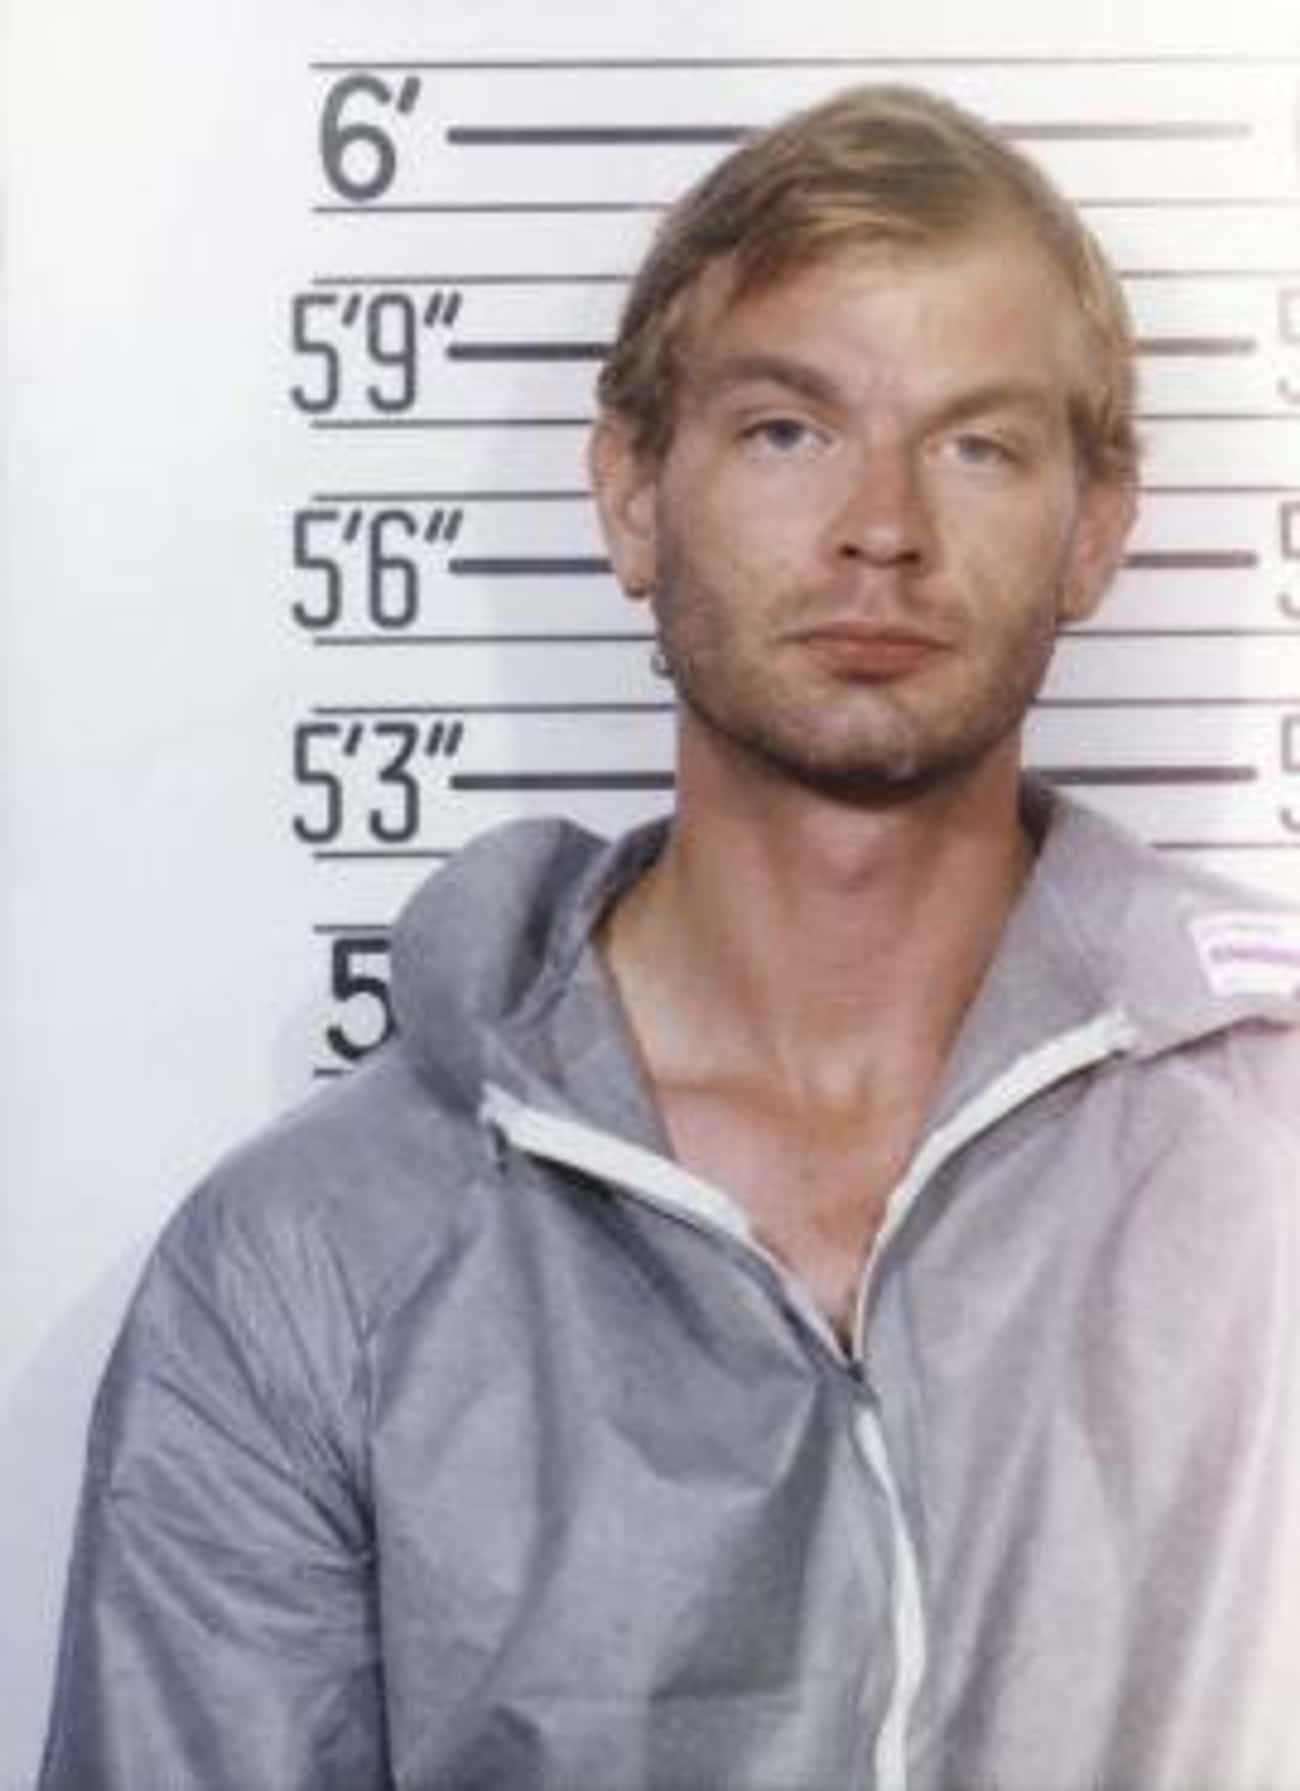 One of Jeffrey Dahmer’s Victims Managed To Escape, But Police Returned Him To Dahmer’s Flat